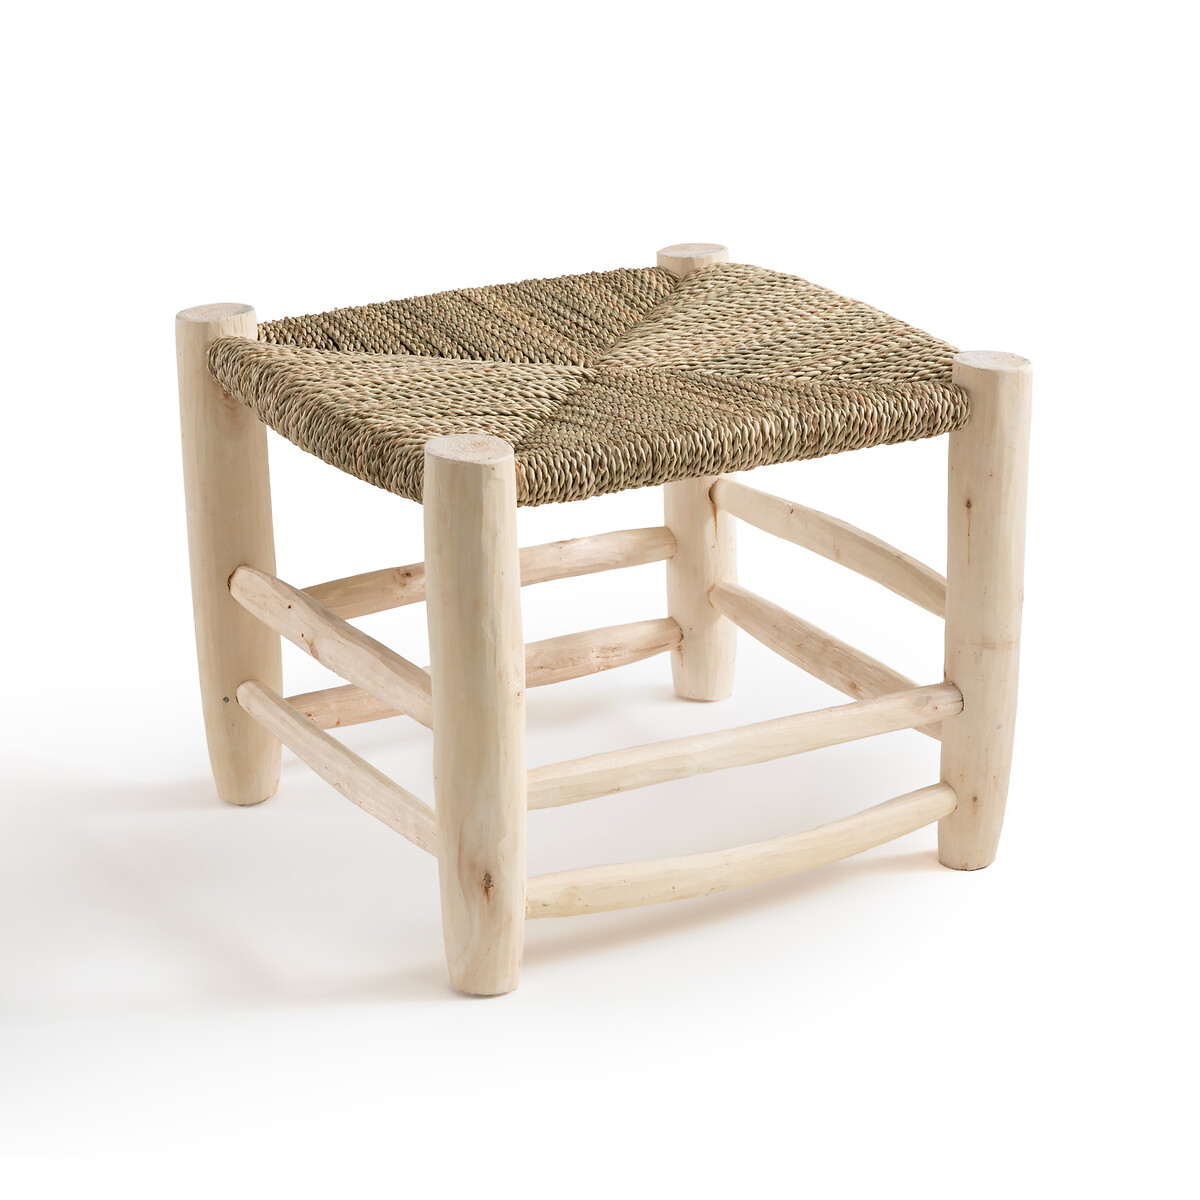 Ghada Moroccan Style Wooden Low Stool